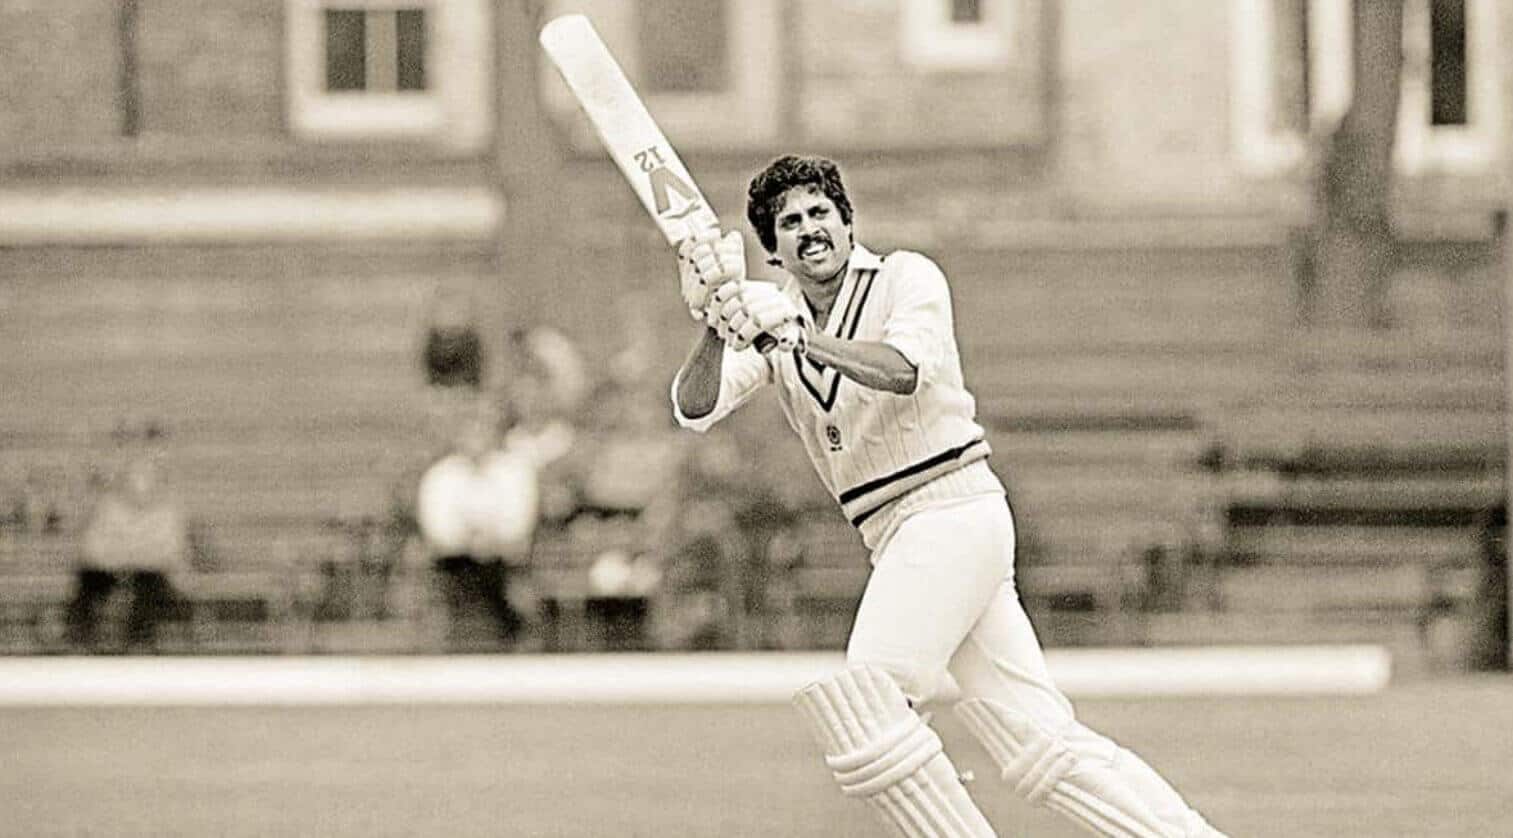 Kapil Dev, one of the best Indian cricket players ever, showcases his skills with the bat